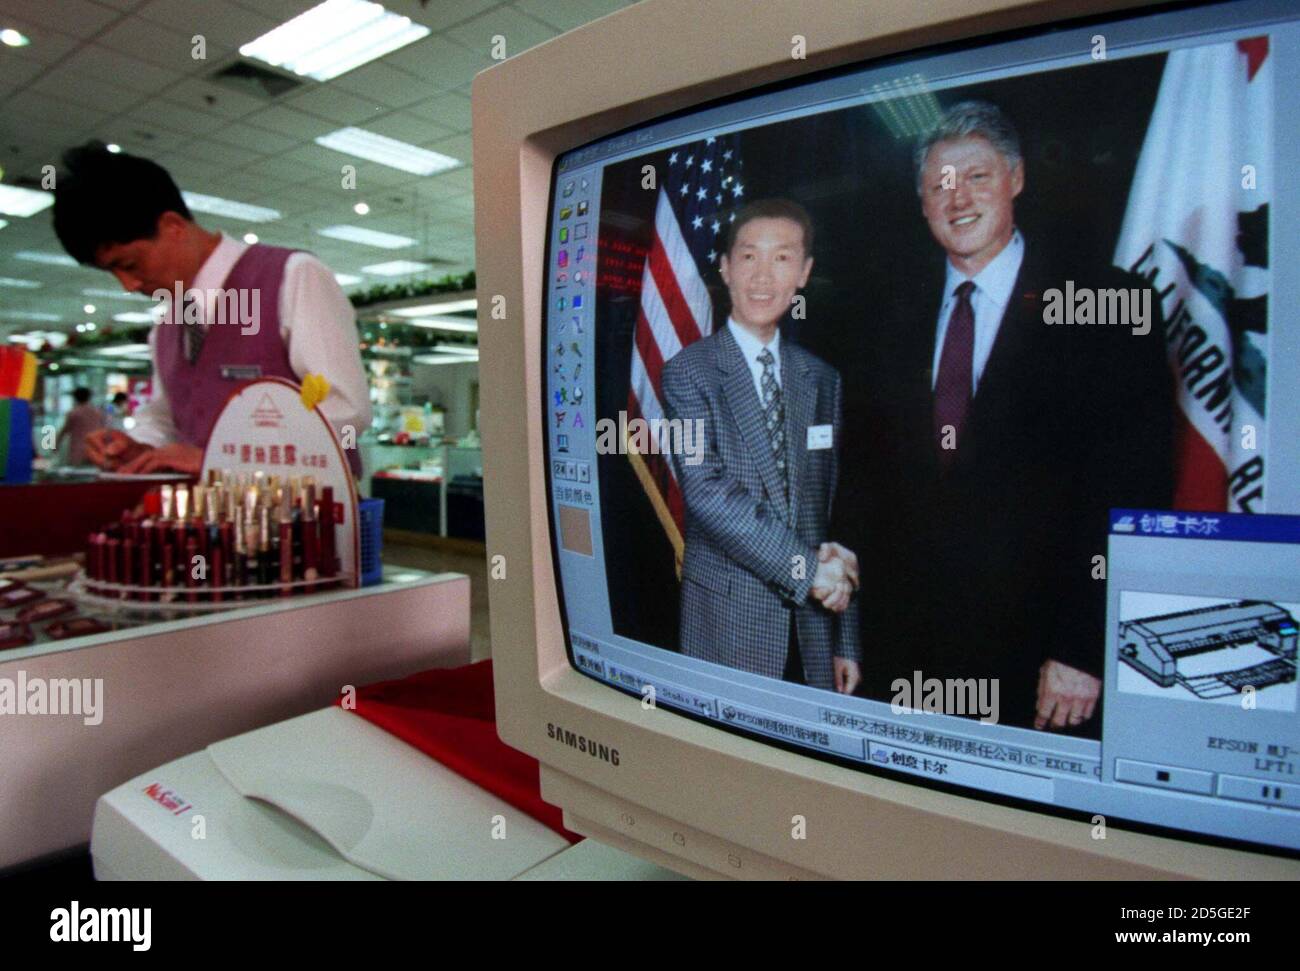 A computer screen in a department store shows a picture of a Chinese man, superimposed on to a photograph, shaking American President Bill Clinton's hand June 24. Clinton arrives in the ancient Chinese capital city of Xian today to kick off a nine-day tour of China. Clinton's trip has generated more ill will than any foreign visit in recent memory. [Members of congress have flayed him for agreeing to attend a welcome ceremony at Tiananmen Square, scene of the 1989 pro-democracy crackdown.] Stock Photo